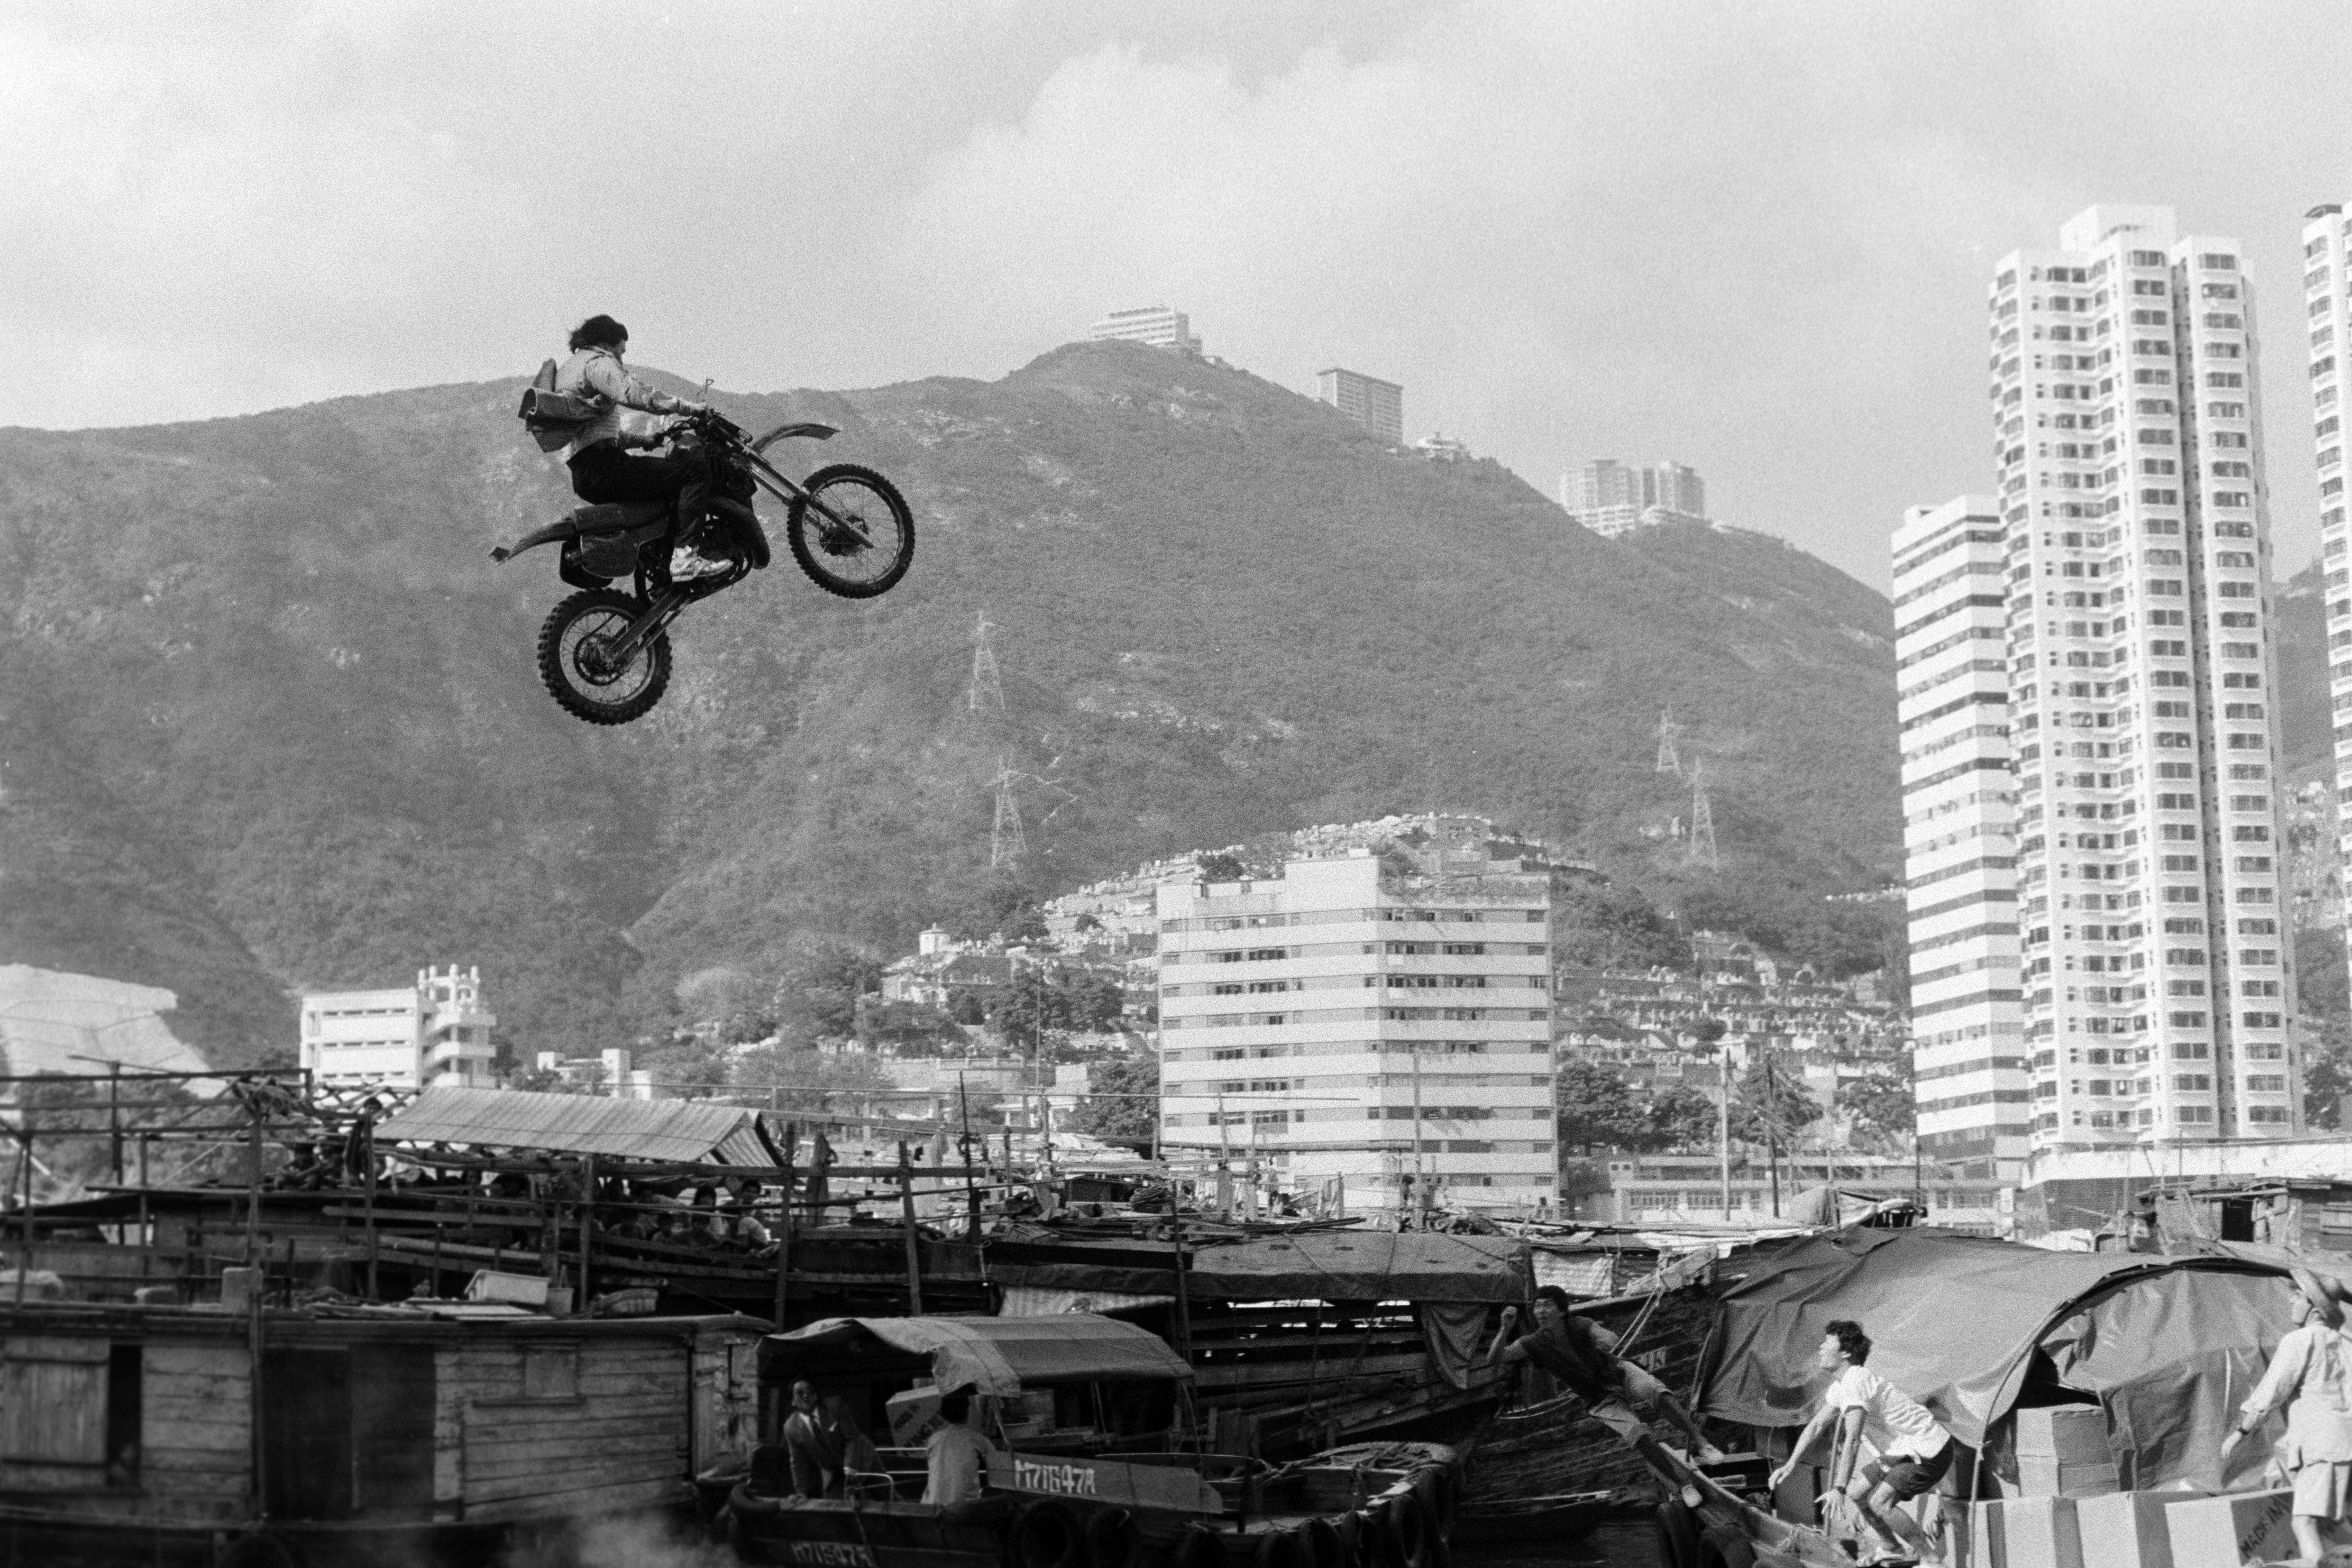 Jackie Chan performing a stunt for the film "The Protector" in 1984. | Source: Getty Images